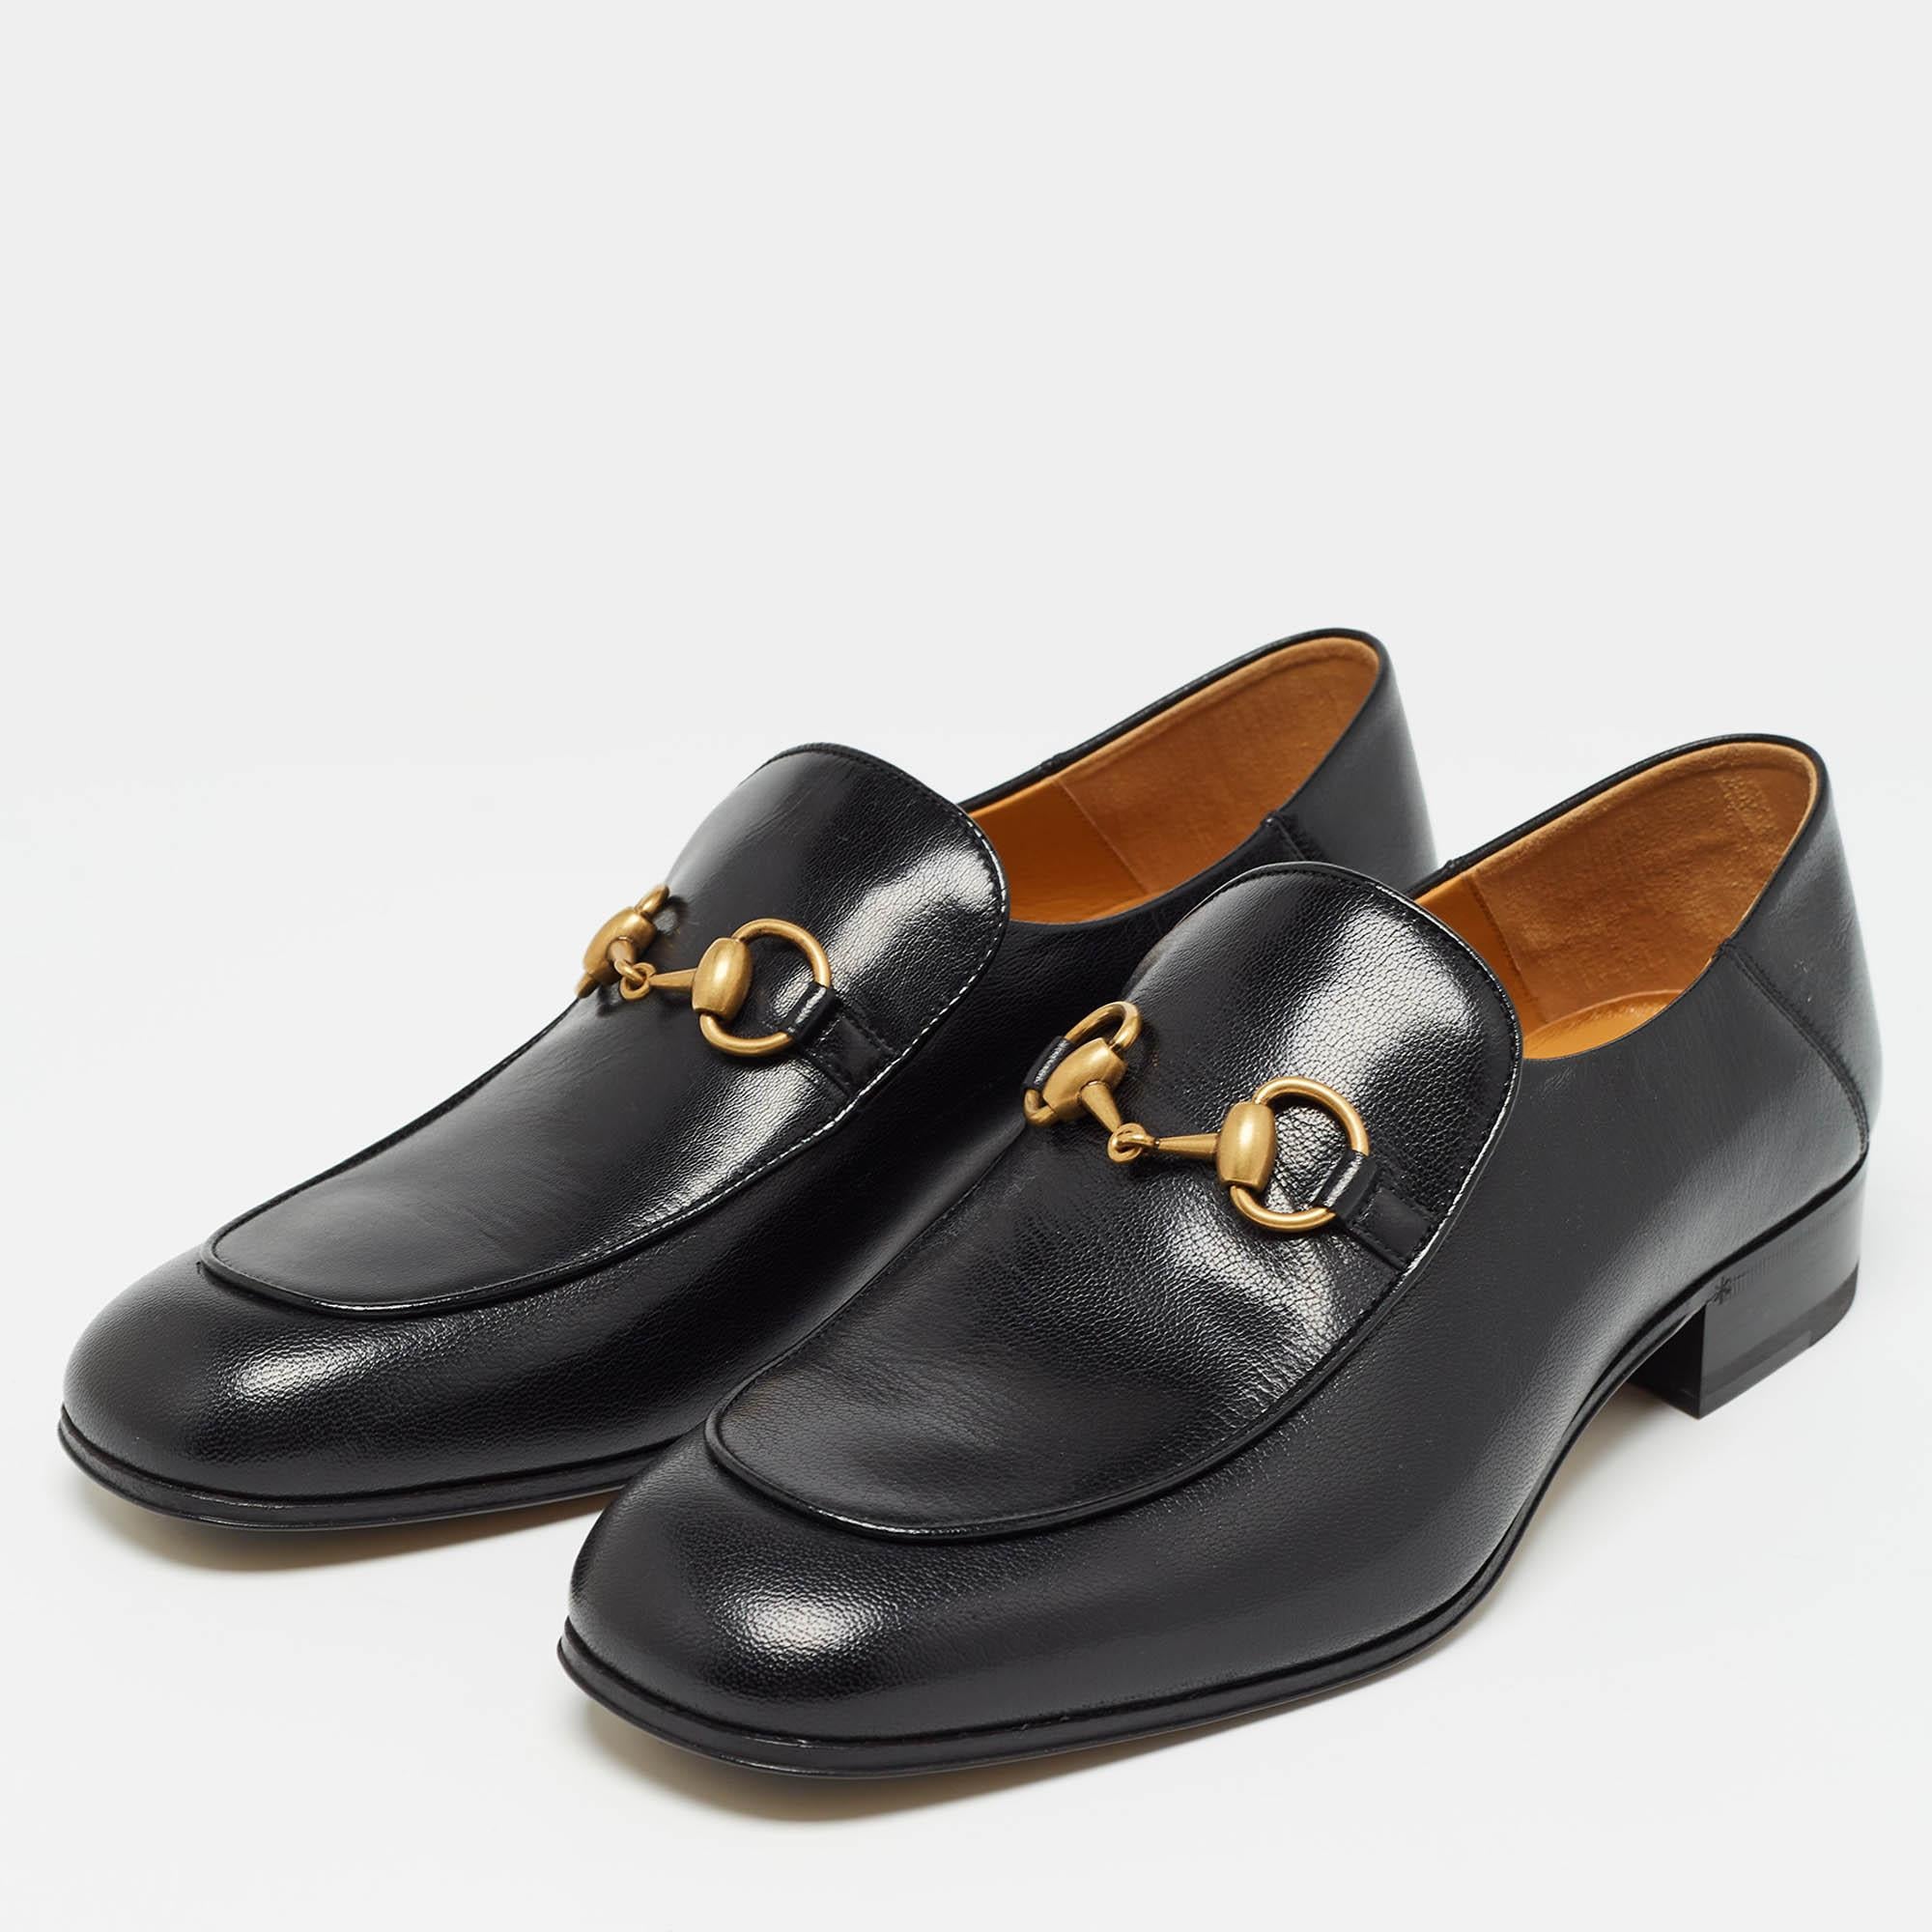 Gucci Black Leather Horsebit Foldable Loafers Size 41 For Sale 2